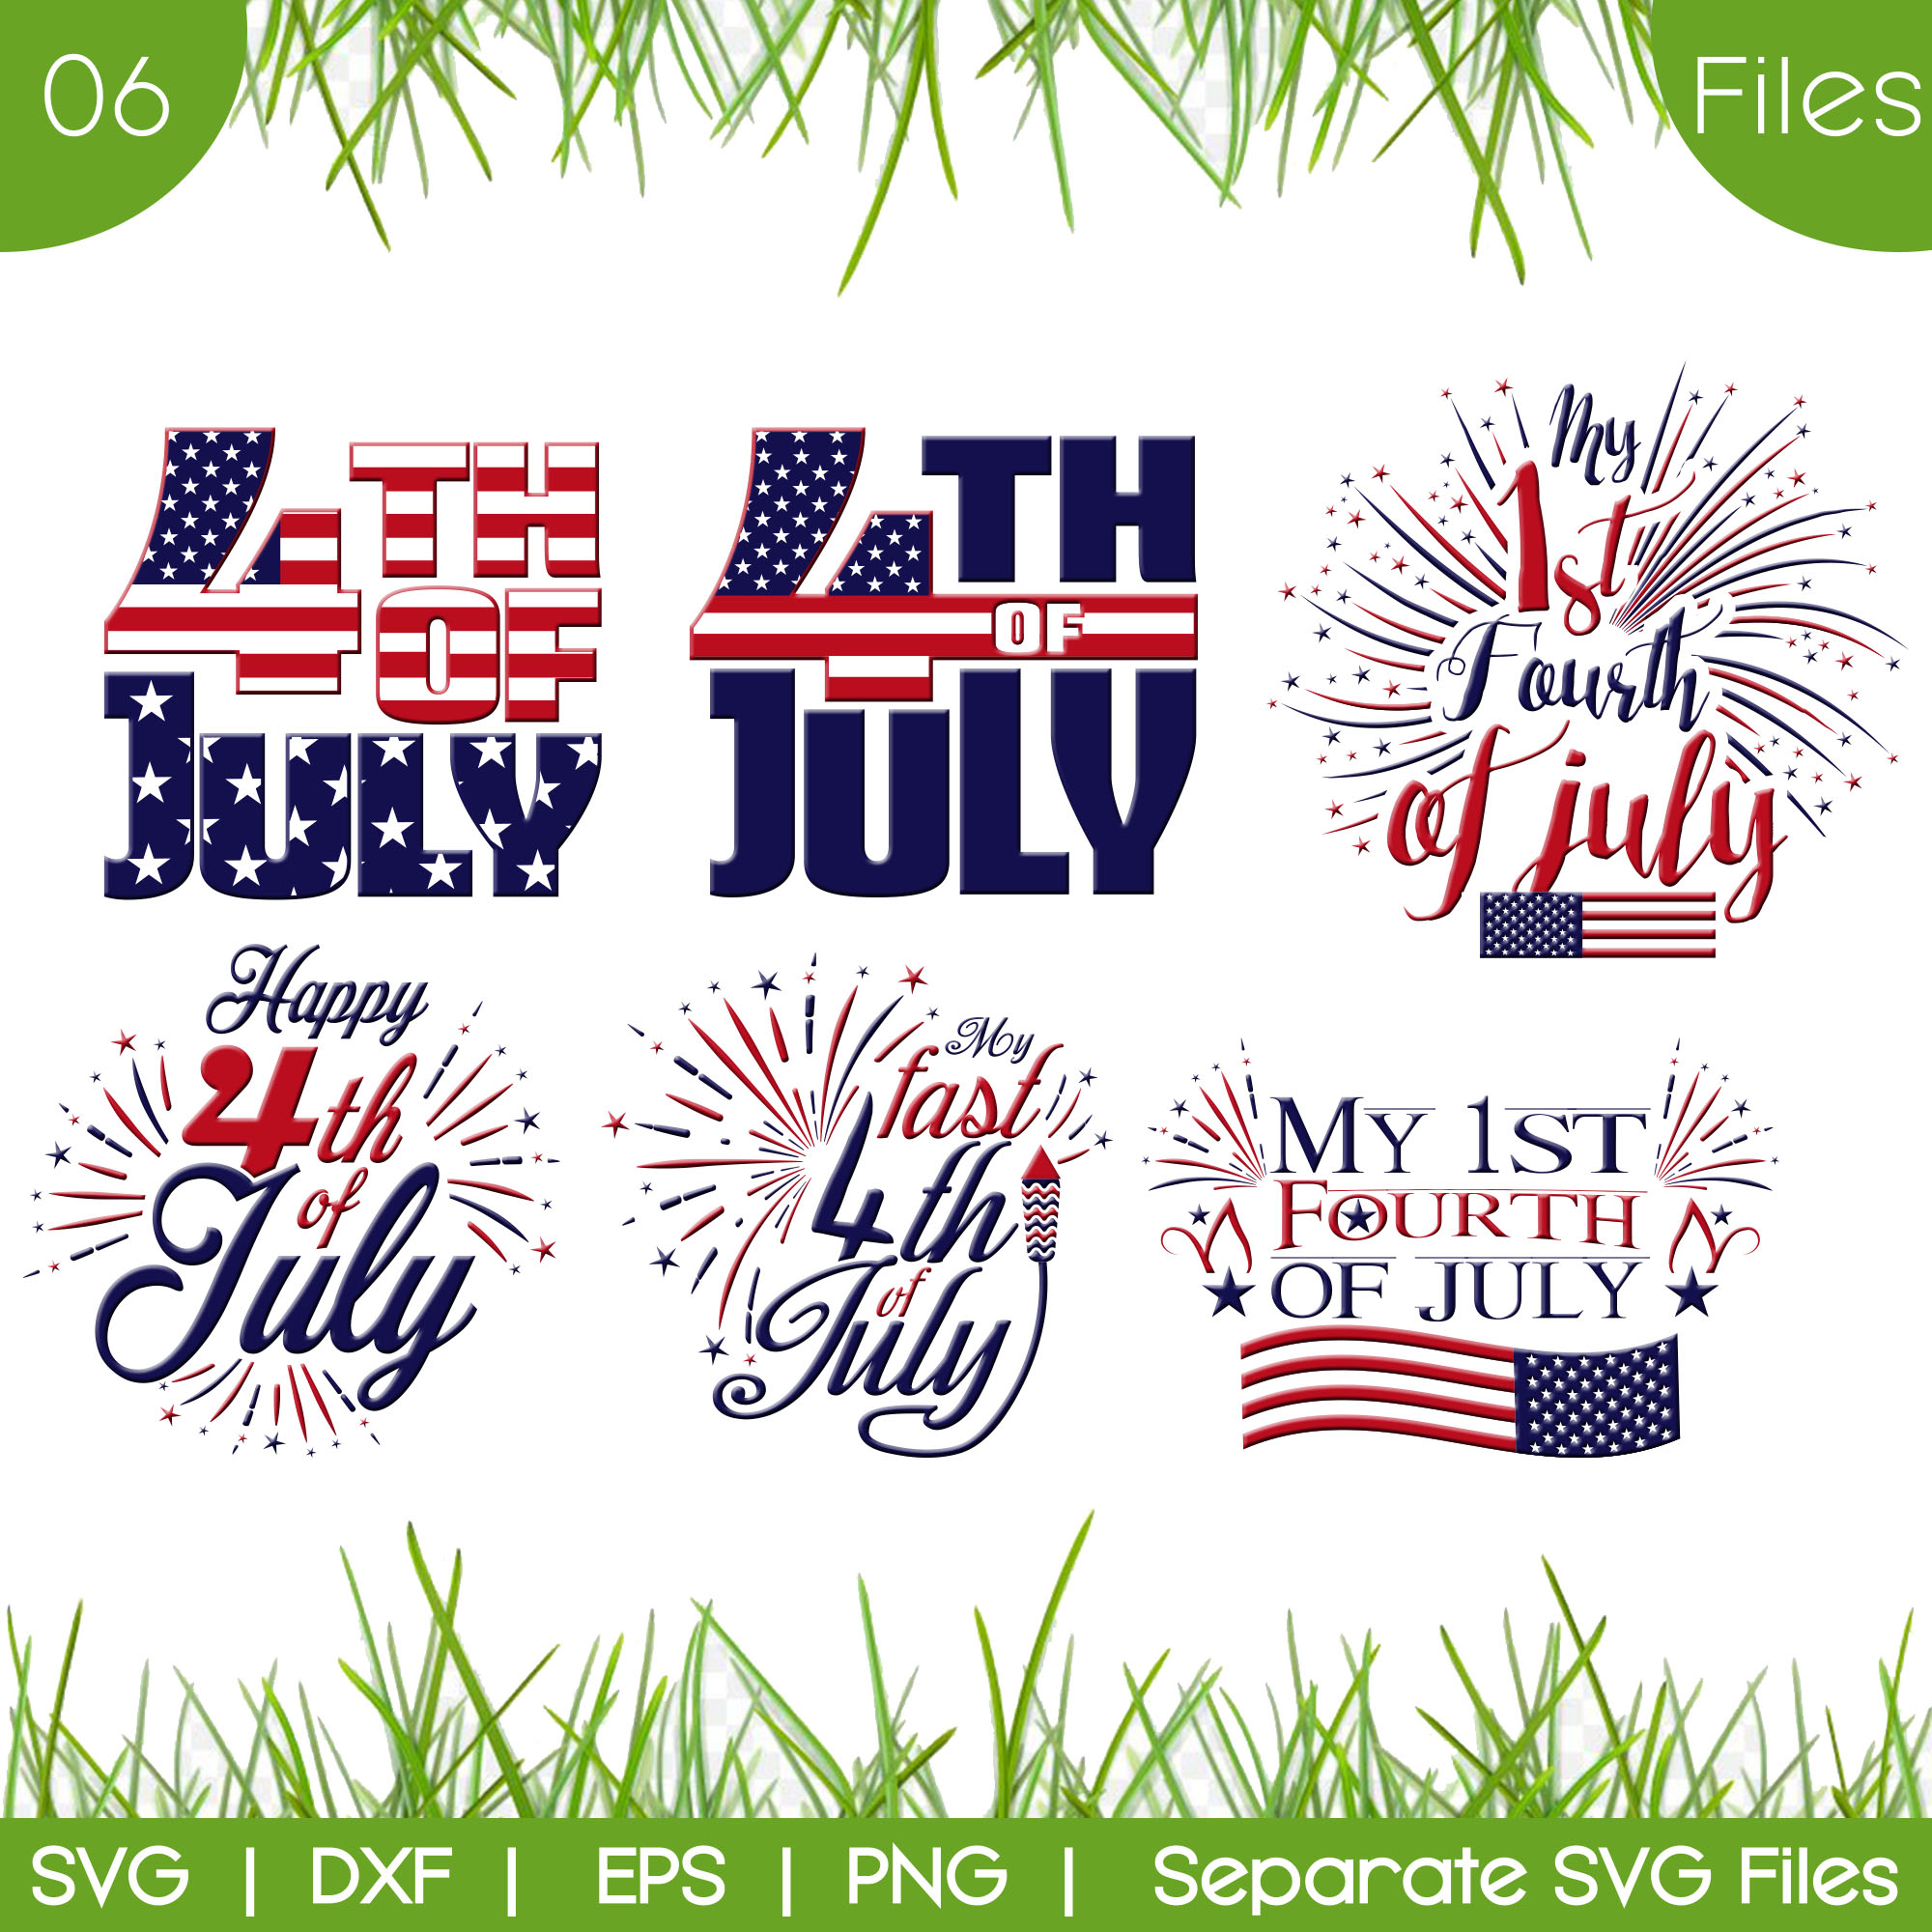 Land of the Free 4th of July SVG Cut File